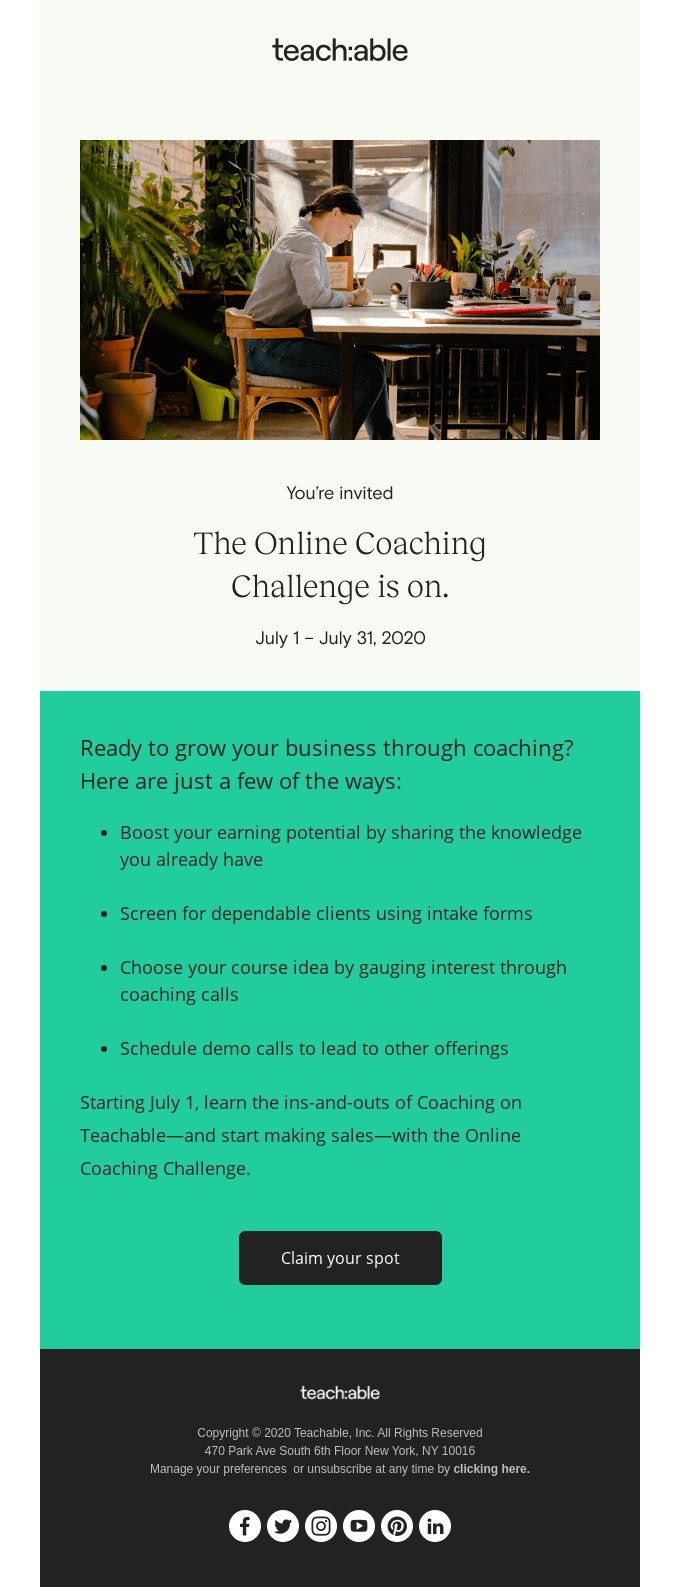 Example of Teachable's webinar email